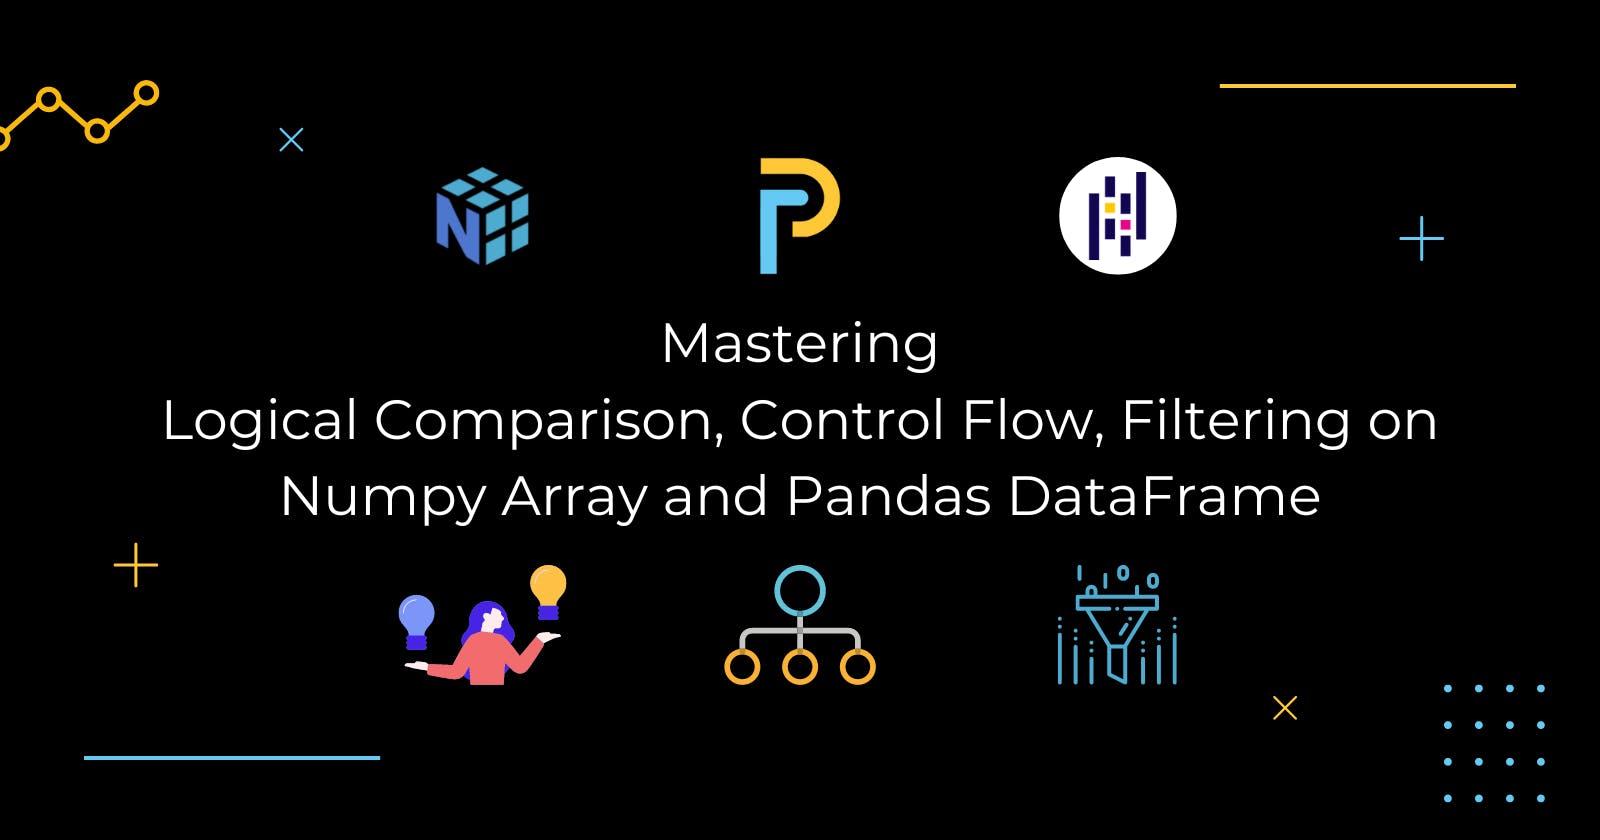 Mastering Logical Comparison, Control Flow, Filtering on Numpy Array and Pandas DataFrame